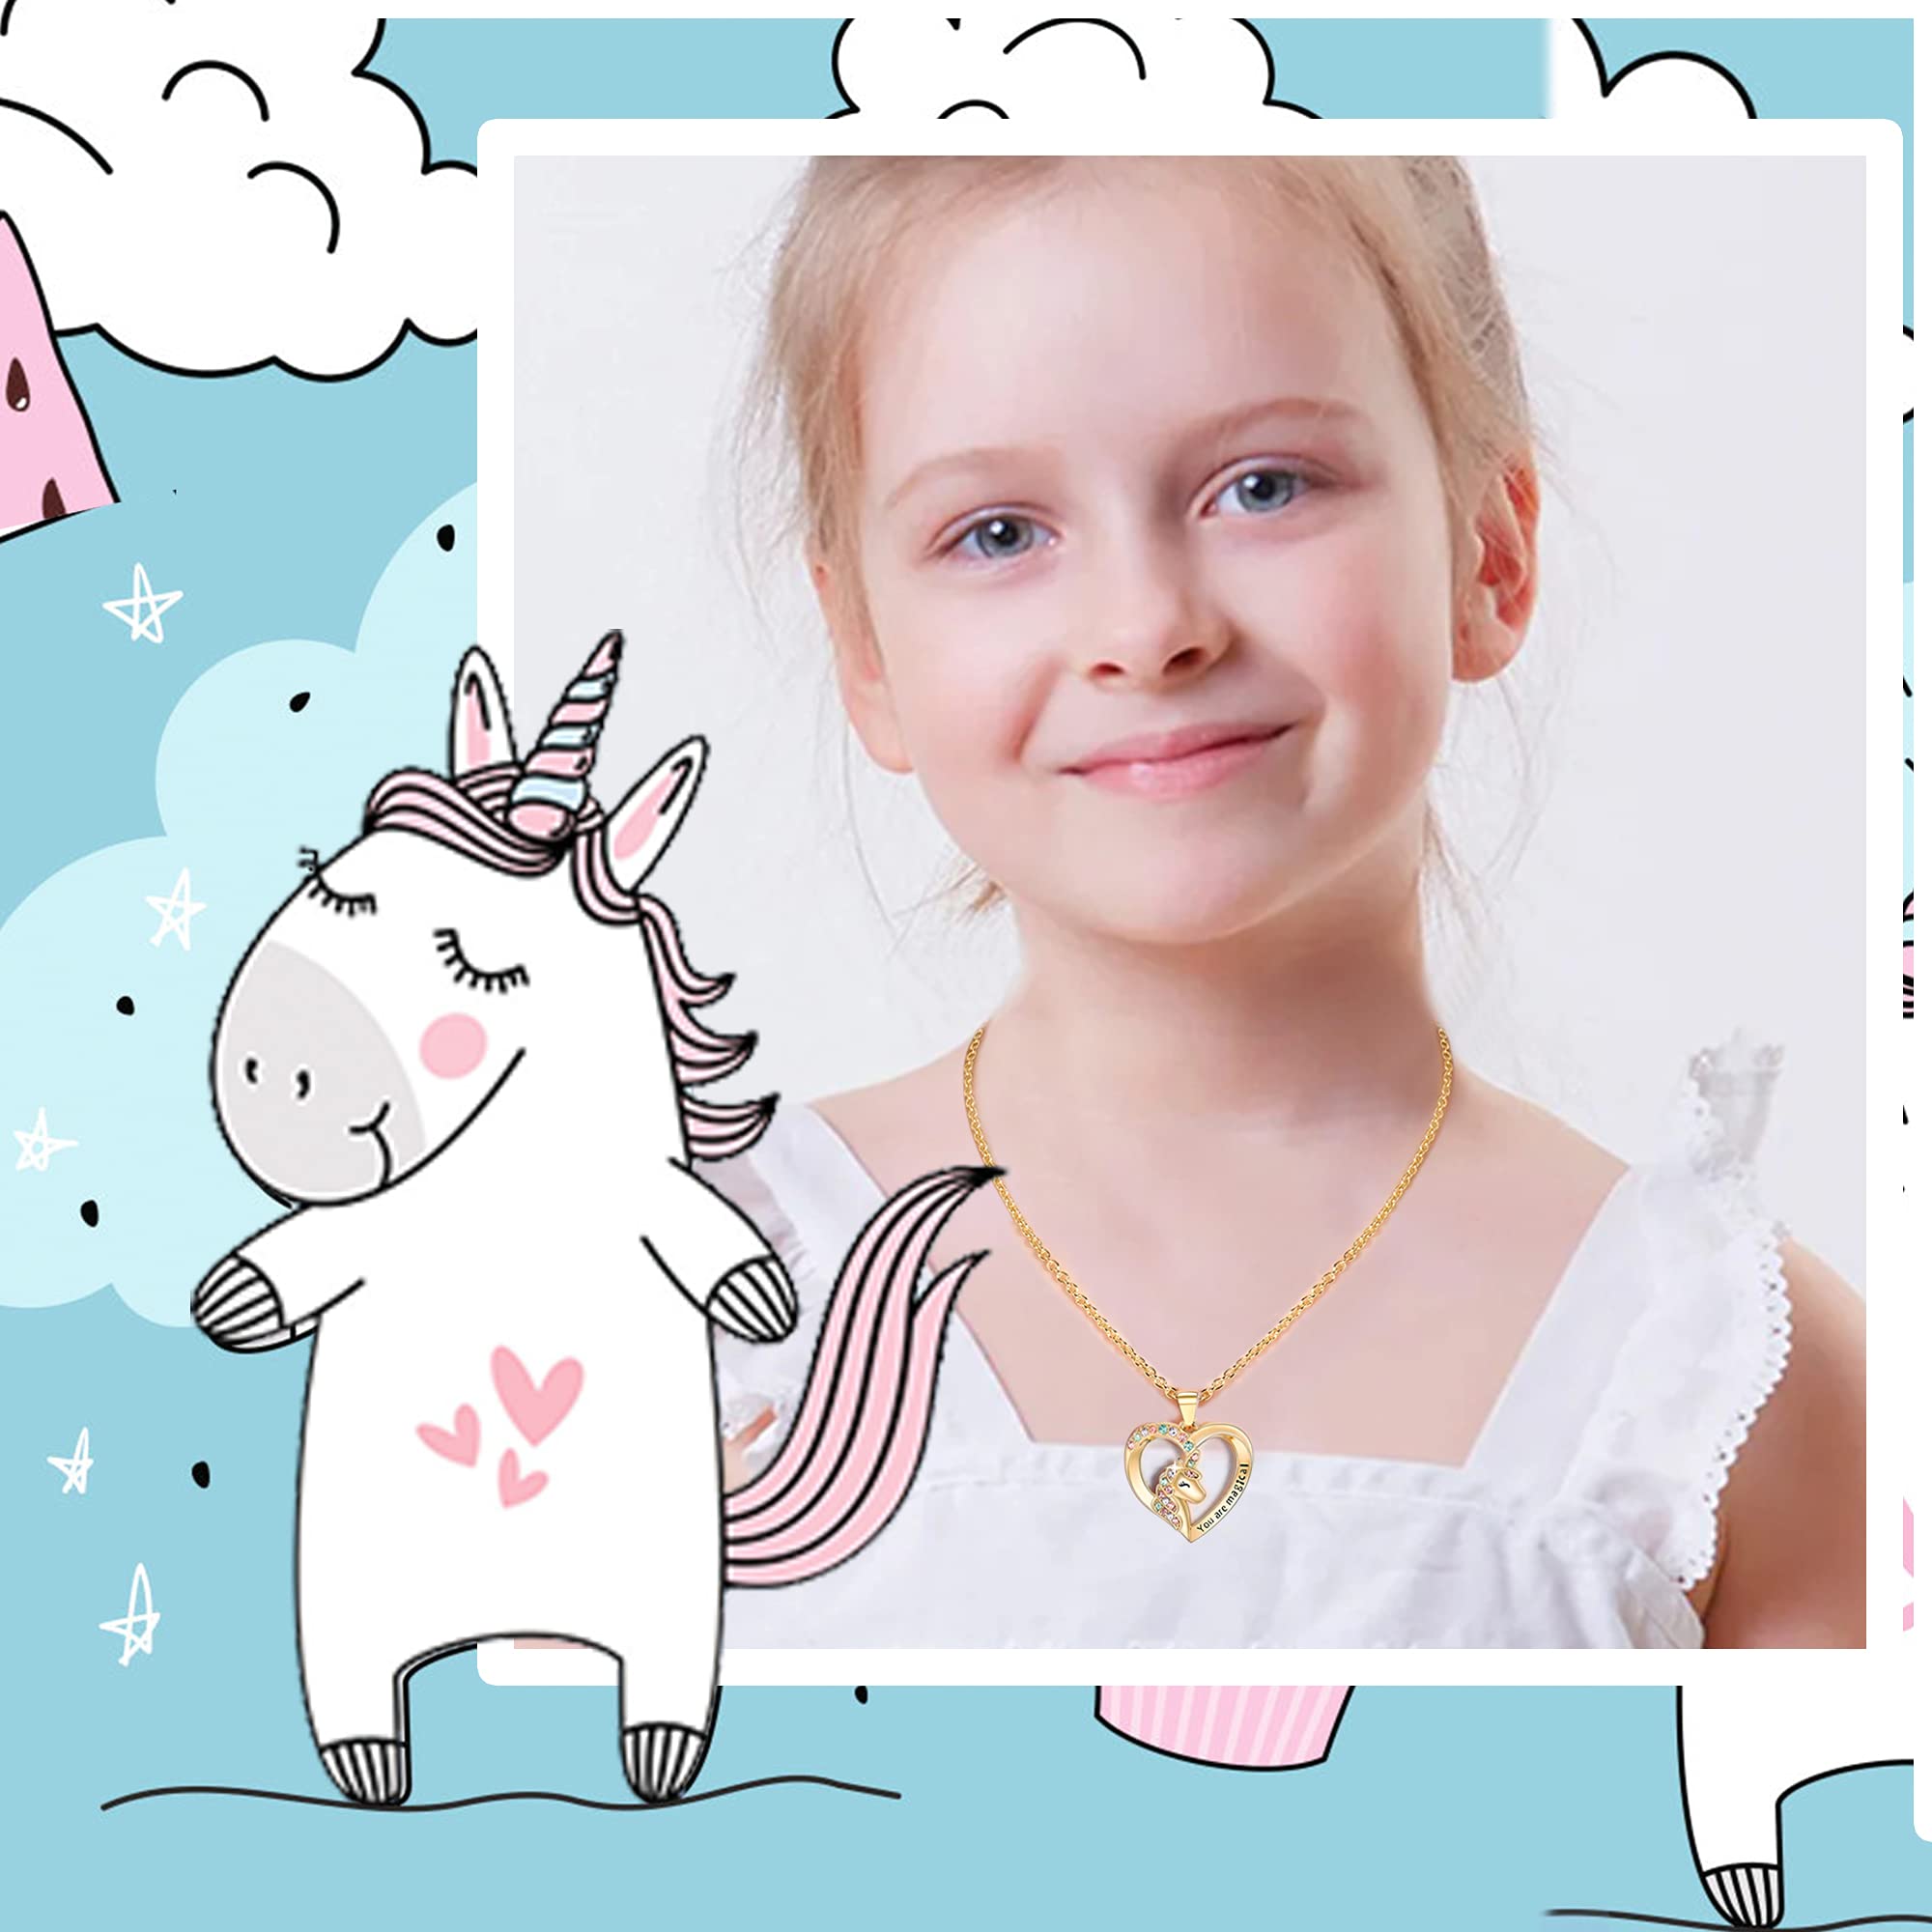 Shonyin Unicorn Necklace for Women Girls CZ Stone Heart Pendant Necklace With You Are Magical Message Christmas Birthday Party Jewelry Gift for Daughter Granddaughter Niece